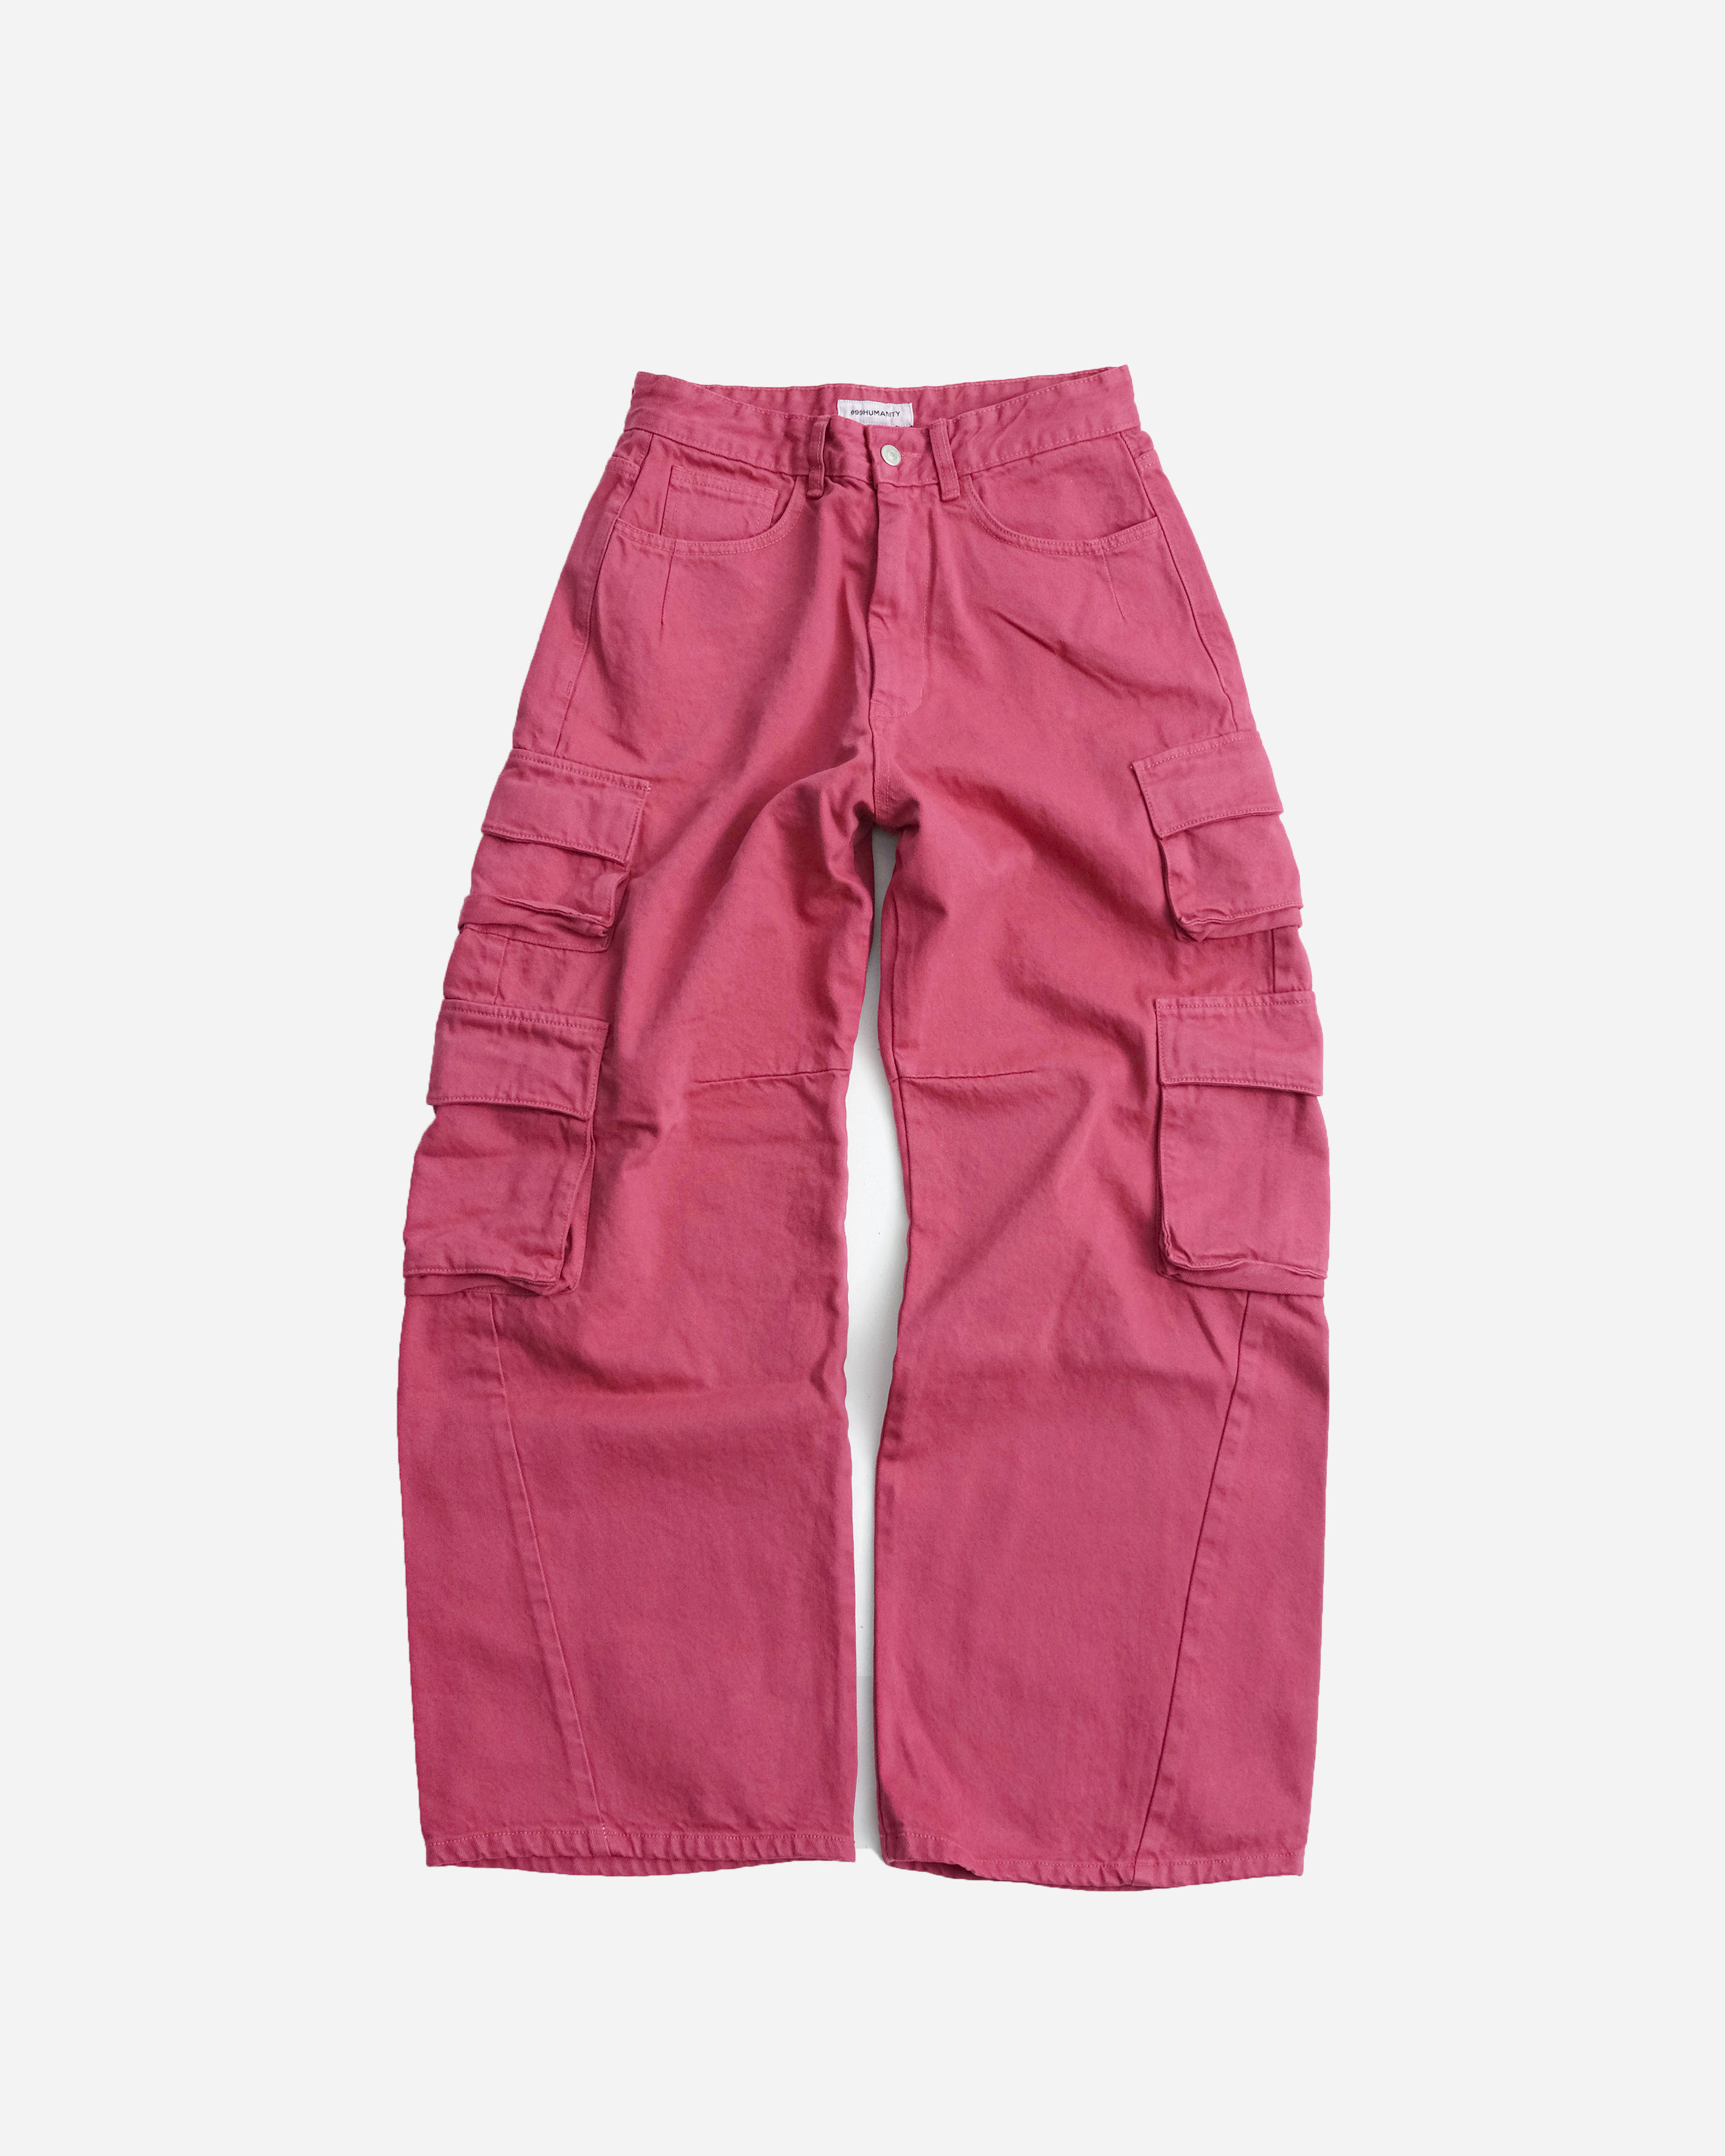 CURVED SULFUR DYED CARGO PANTS (HOT PINK)